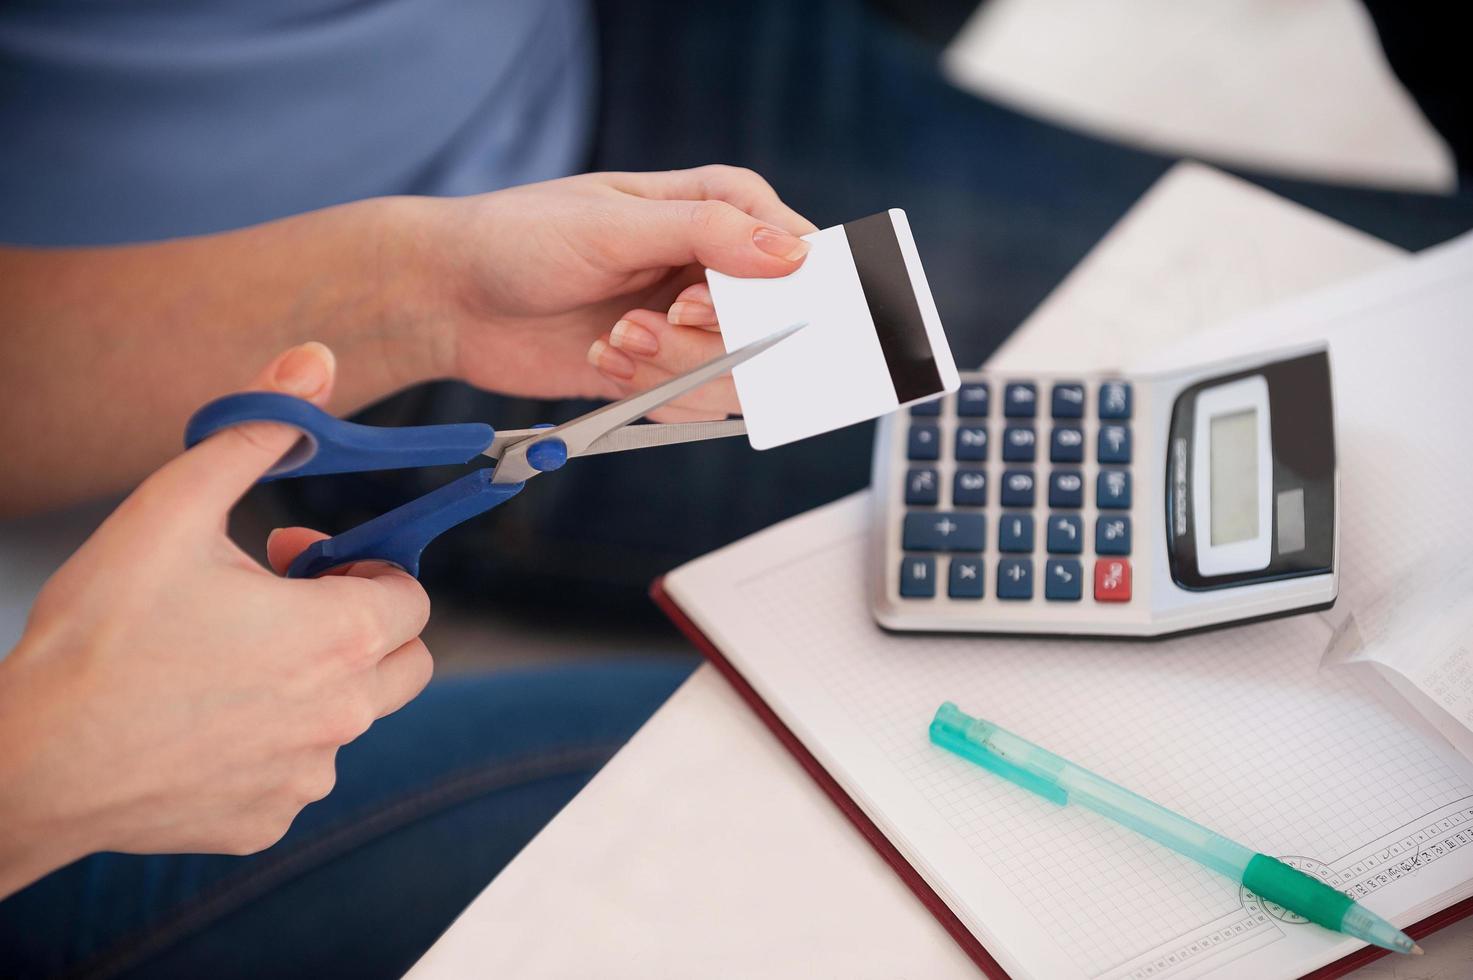 Cutting the expenses. Cropped image of woman cutting a credit card with scissors photo